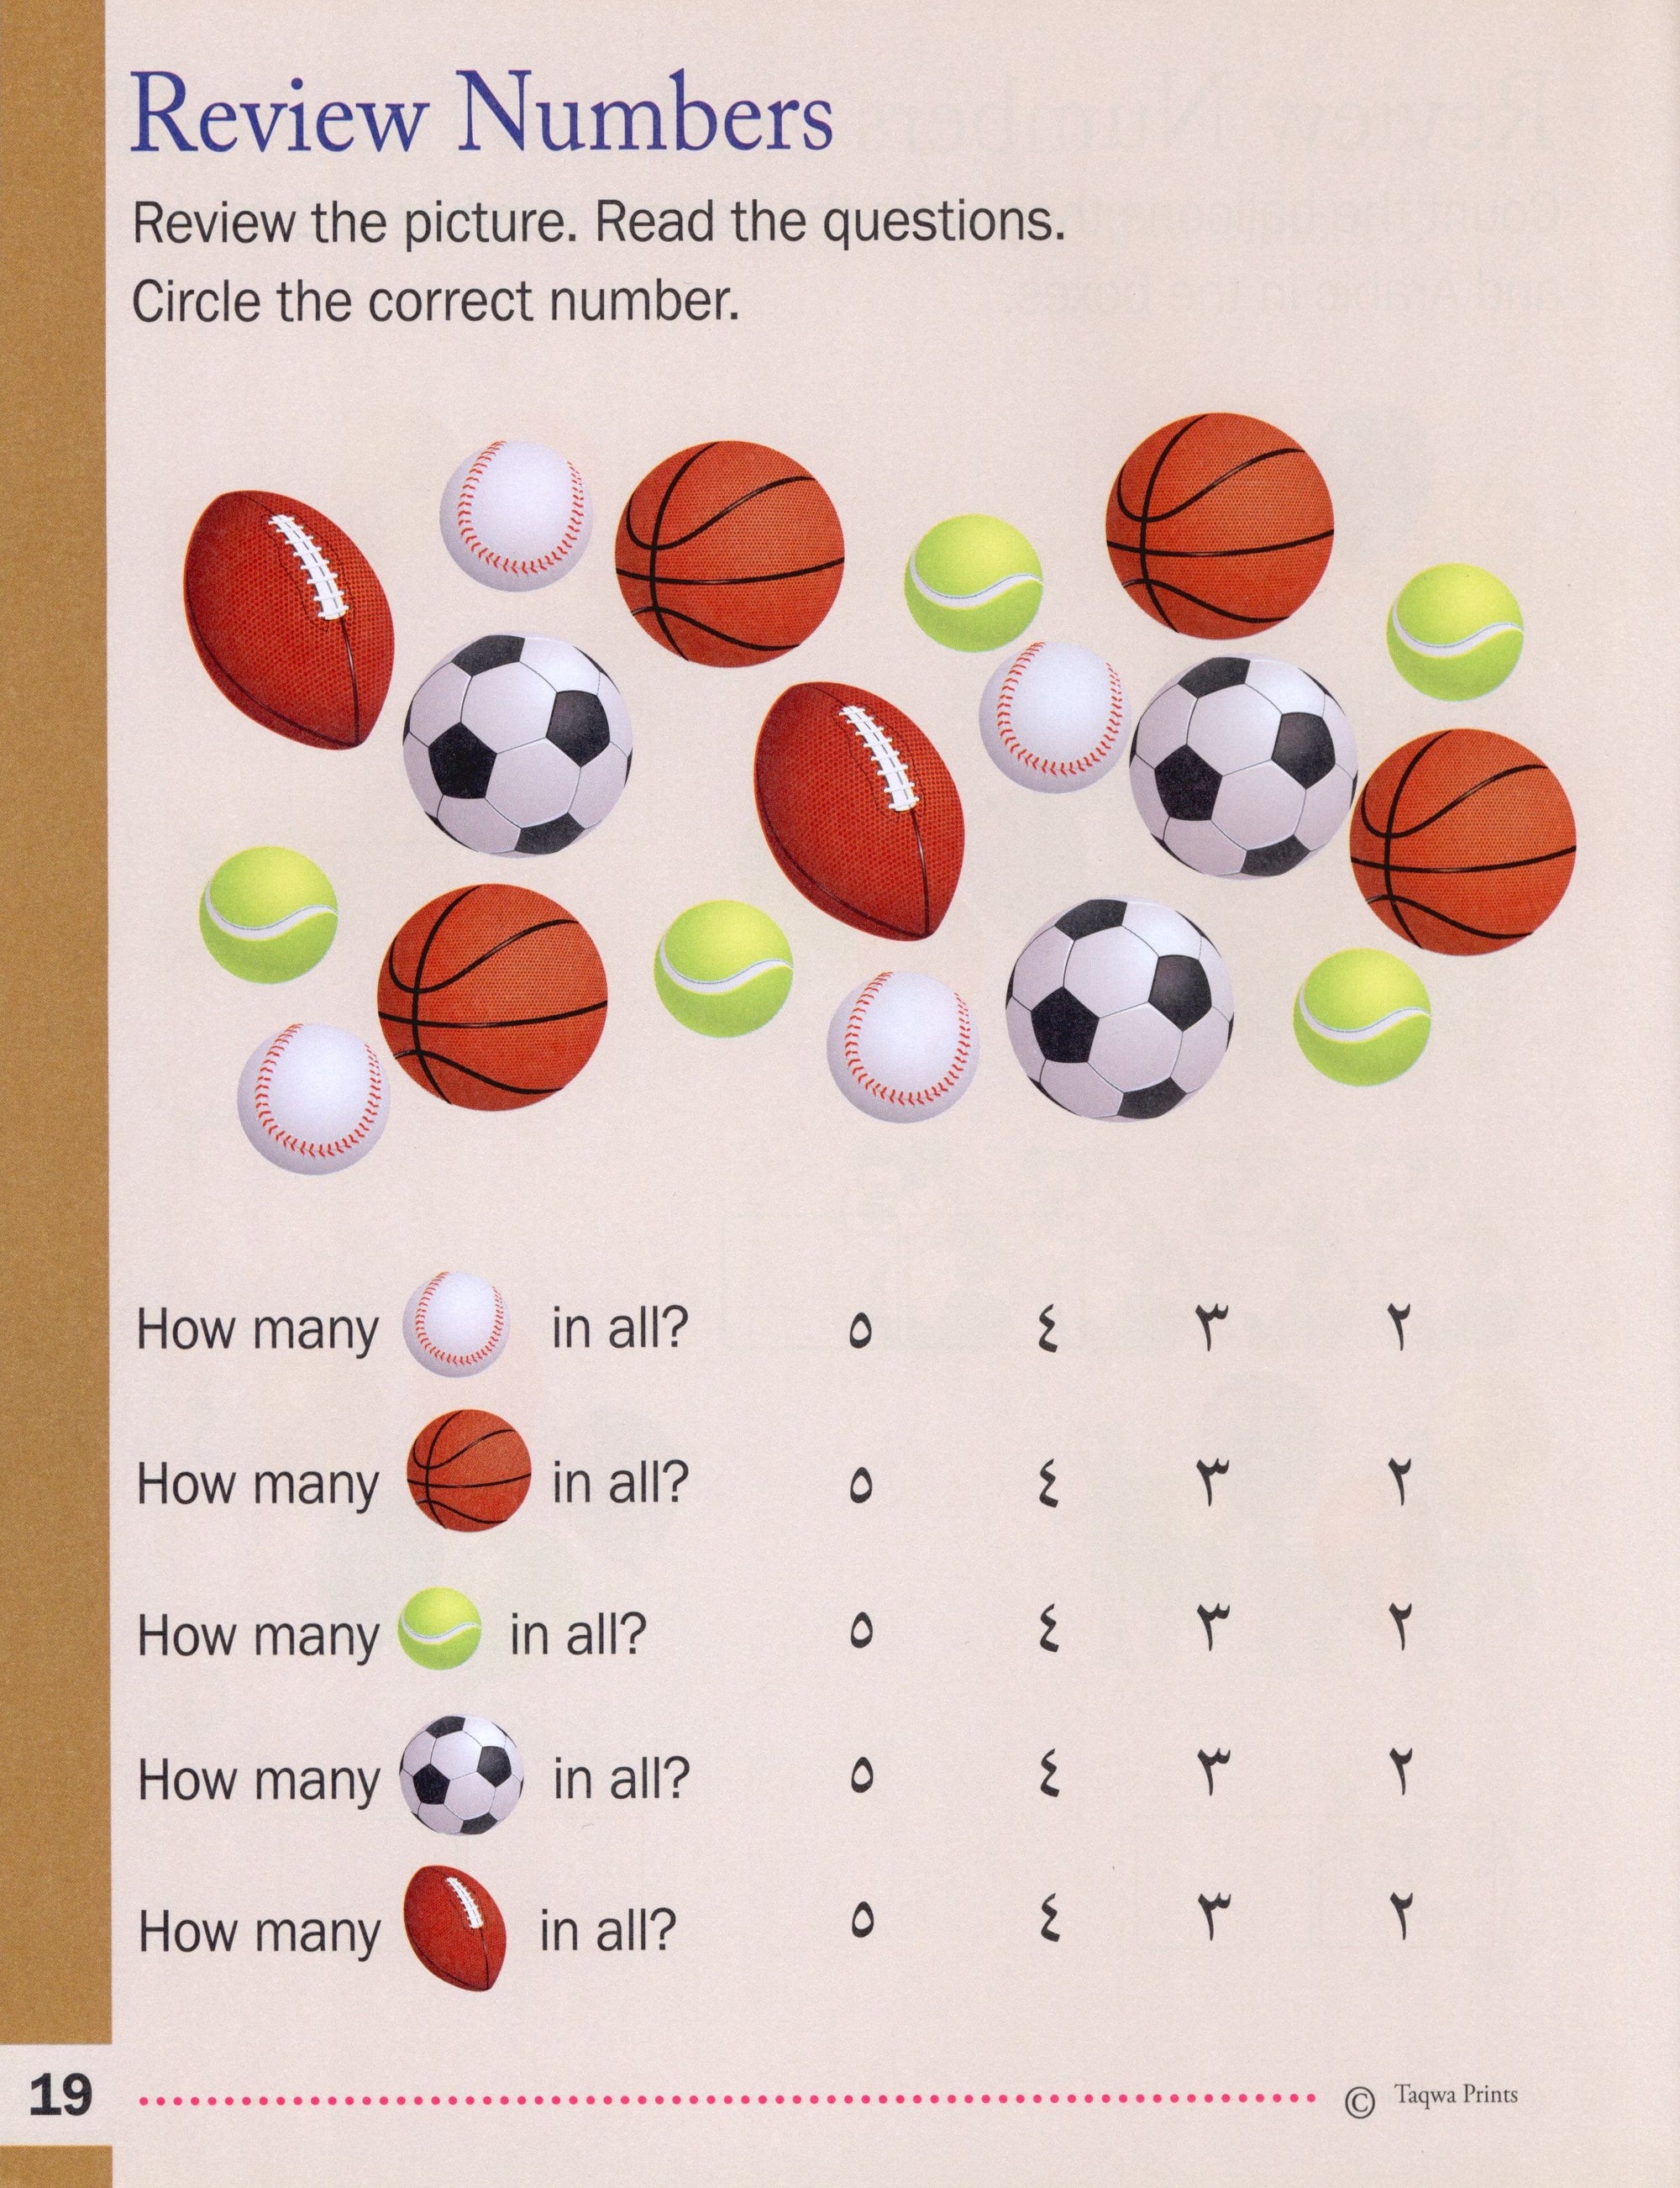 Learning Numbers and Counting in Arabic